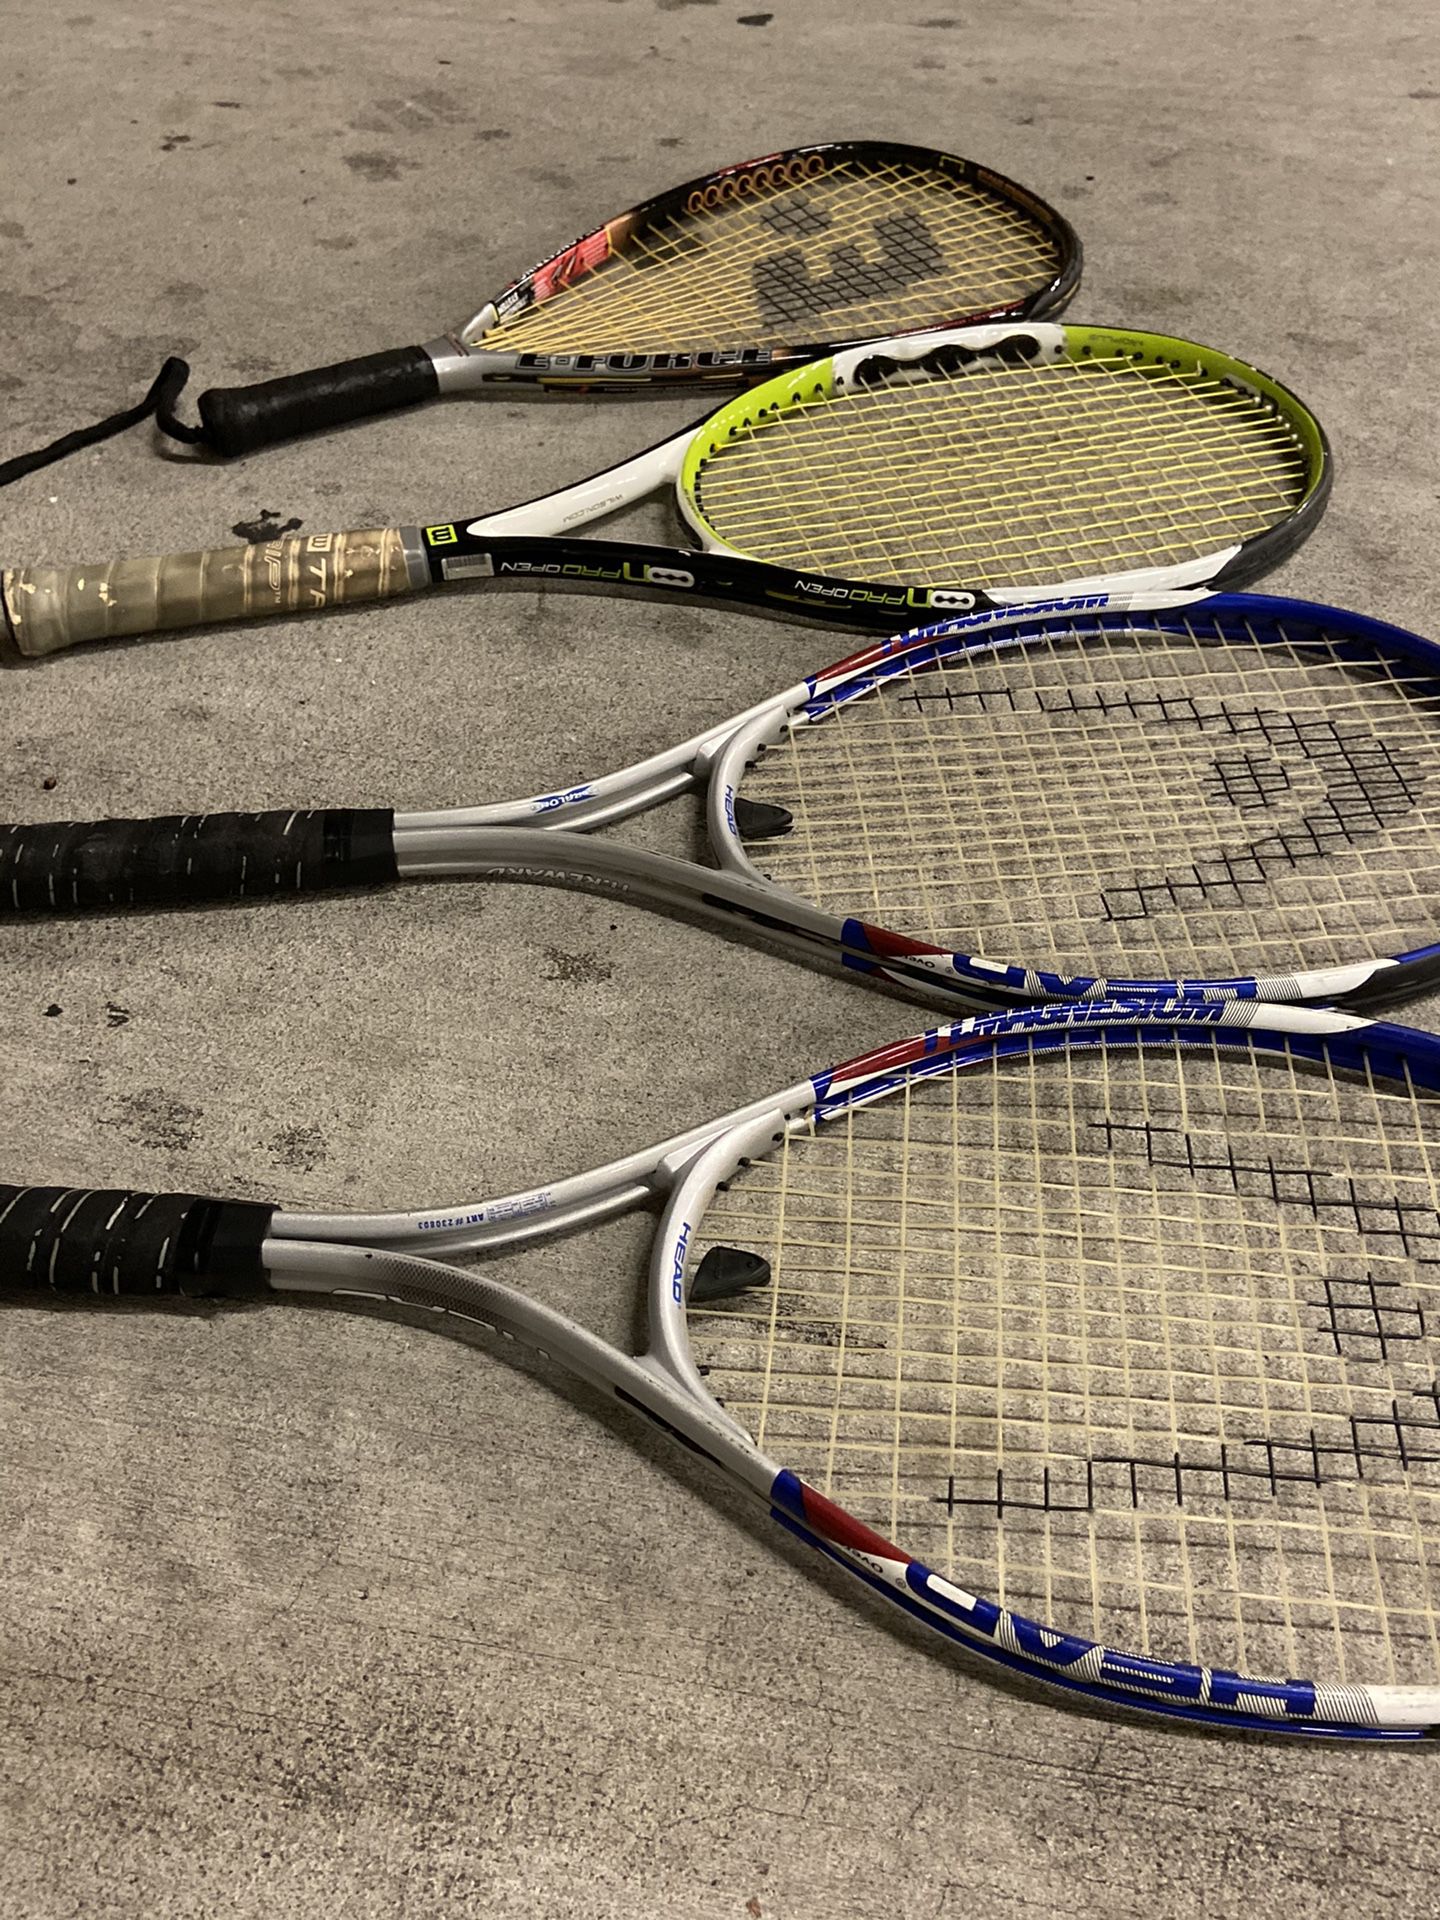 Tennis and racquetball rackets